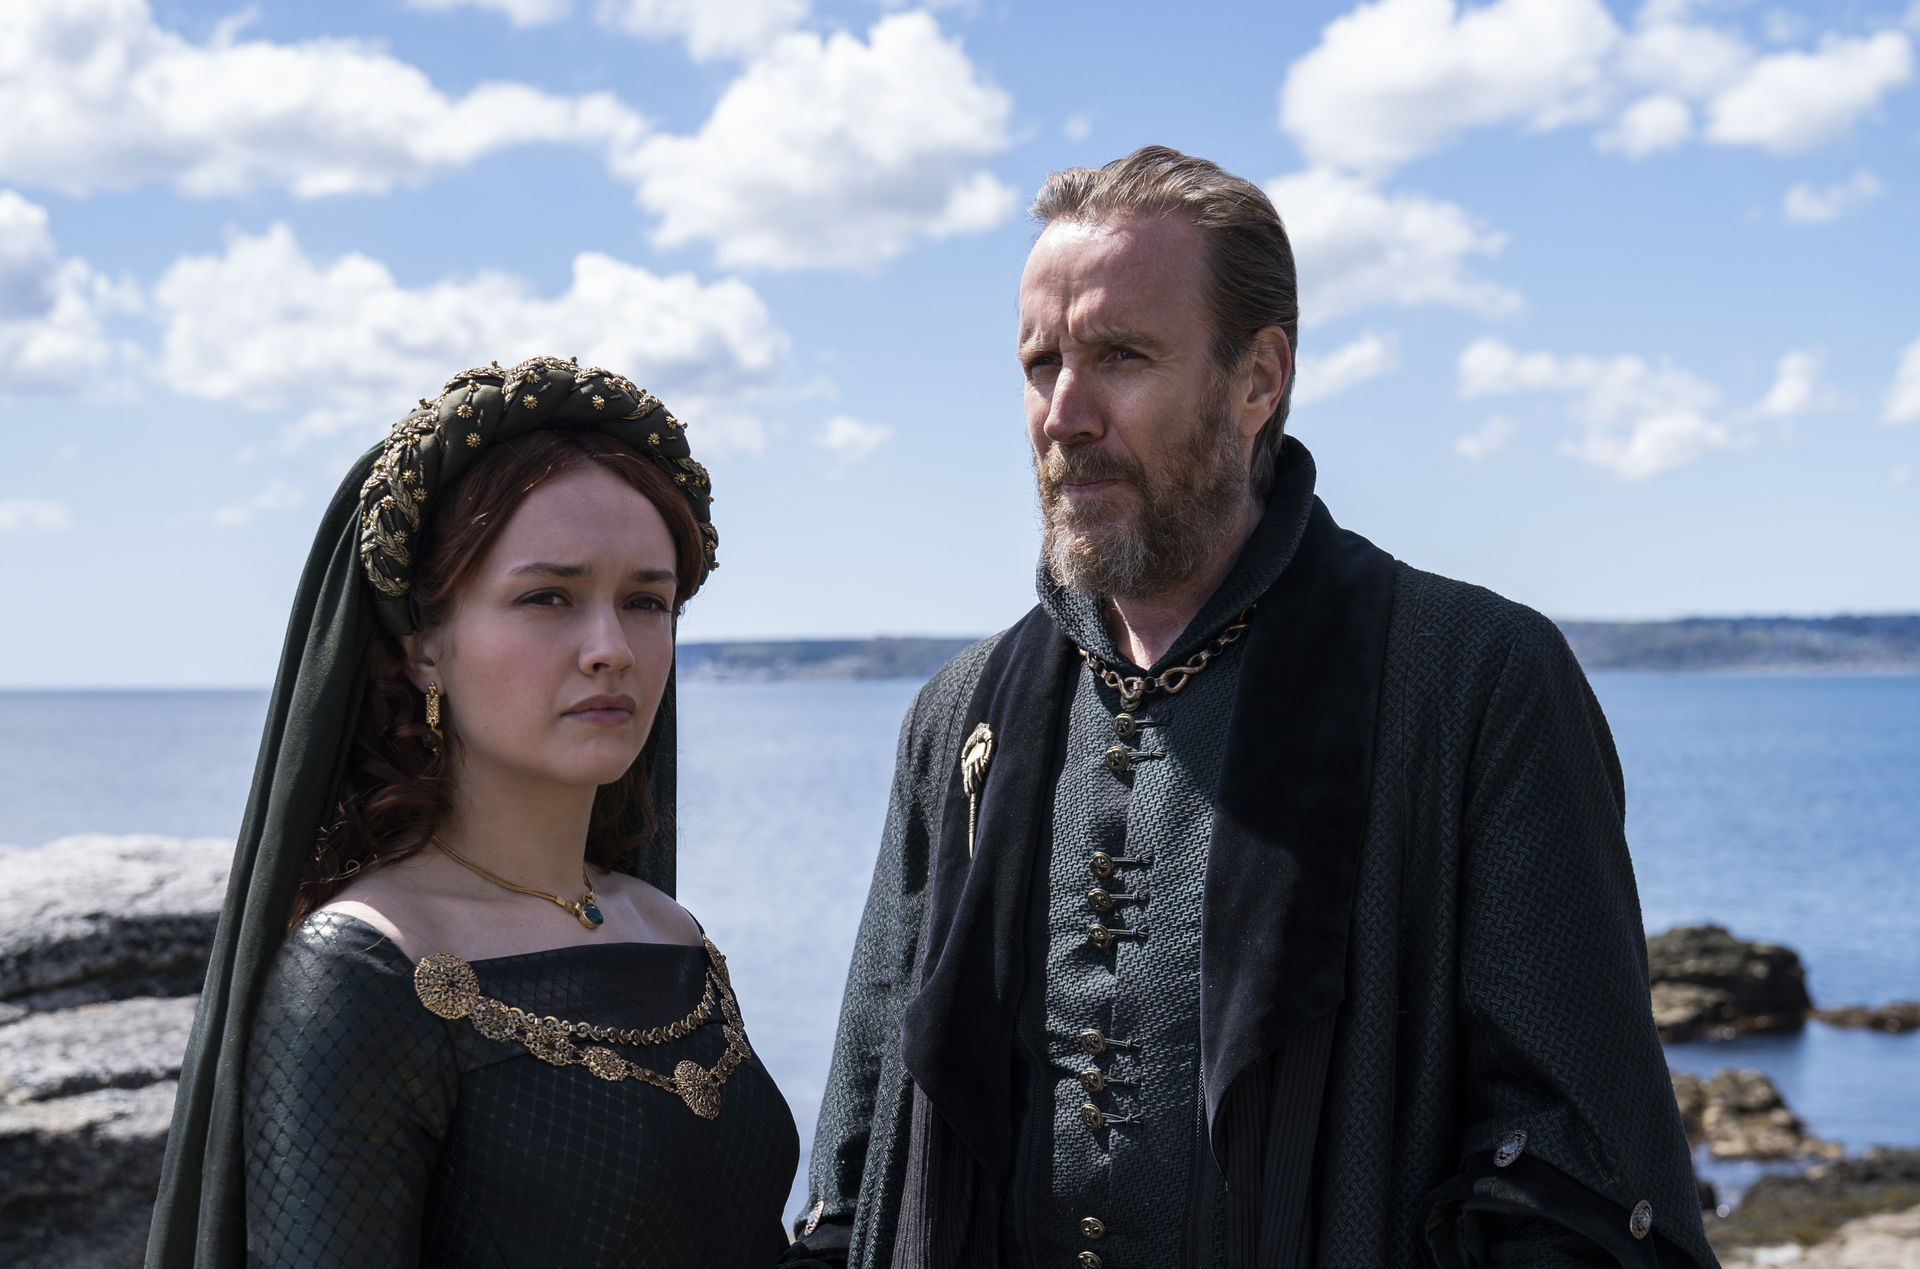 Olivia Cooke as "Alicent Hightower" and Rhys Ifans as "Otto Hightower" in HBO’s upcoming Series “House of the Dragon.” Photograph by Ollie Upton/HBO